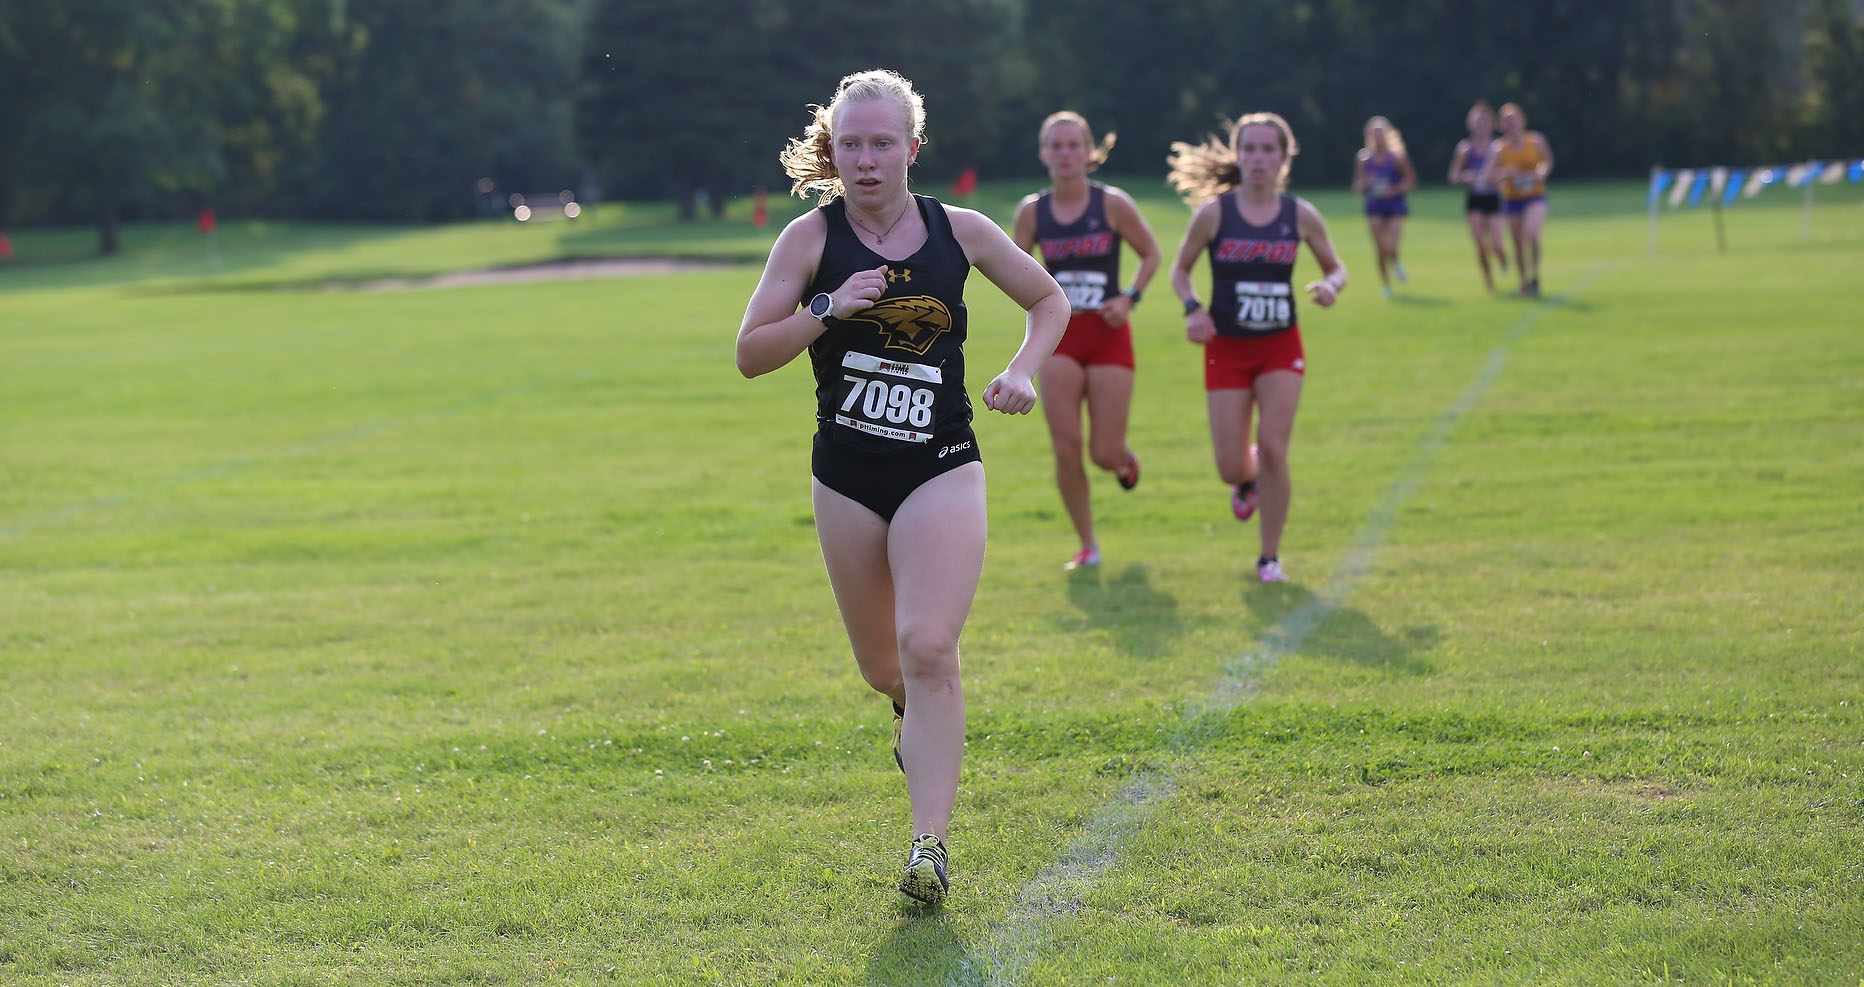 Lauren Urban placed second out of 32 runners to help the Titans win the UW-Oshkosh Open title.